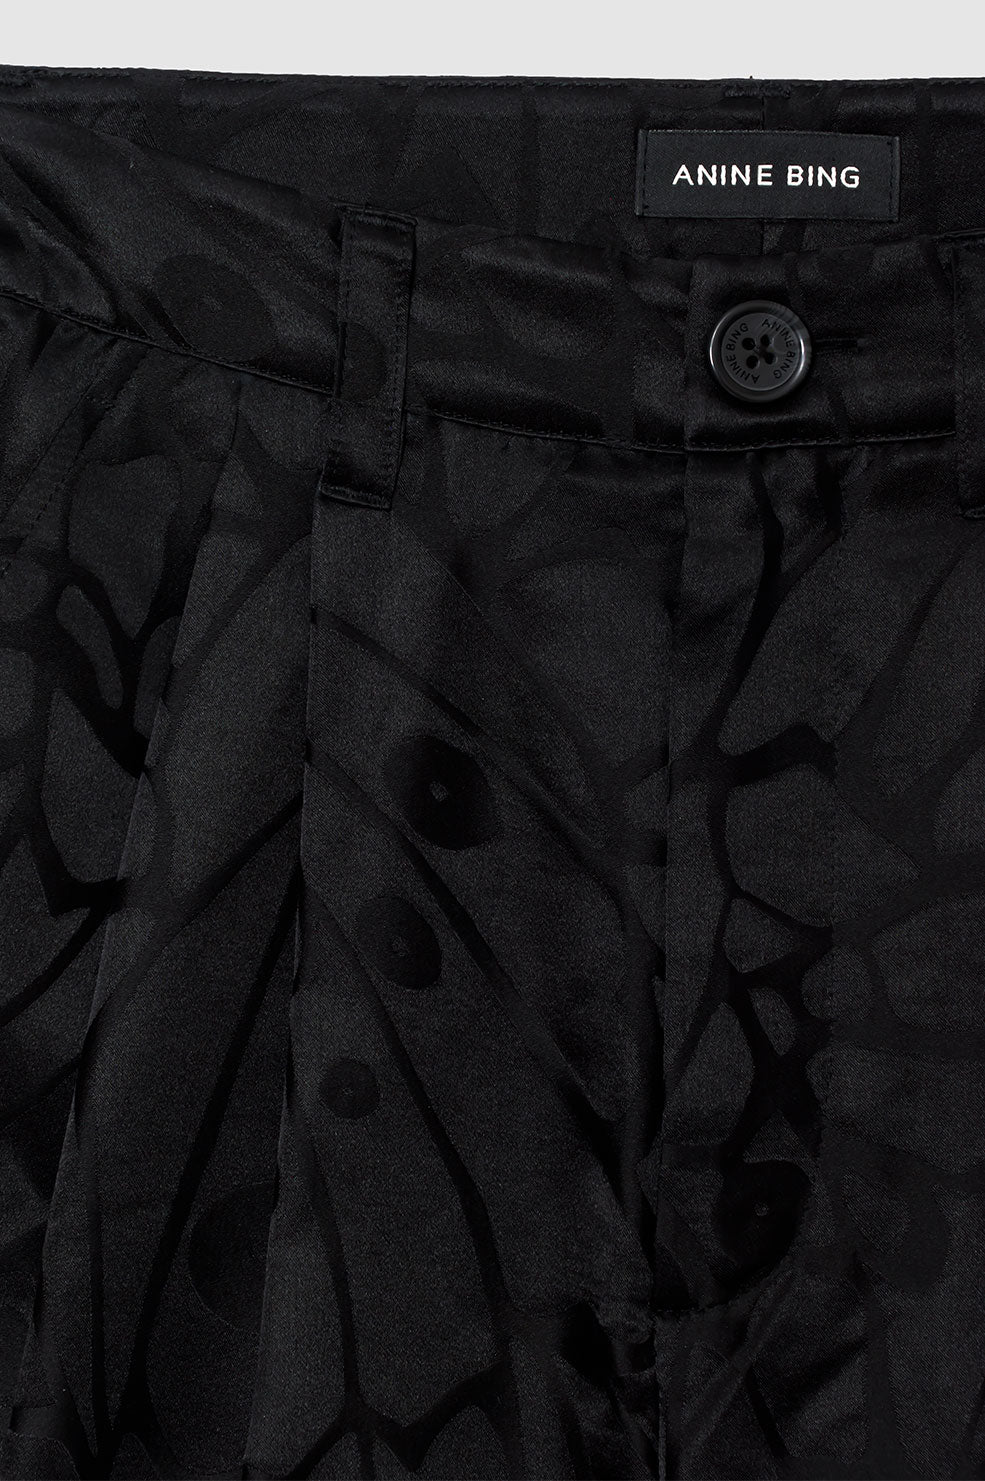 ANINE BING Carrie Short - Black Butterfly Jacquard - Detail View